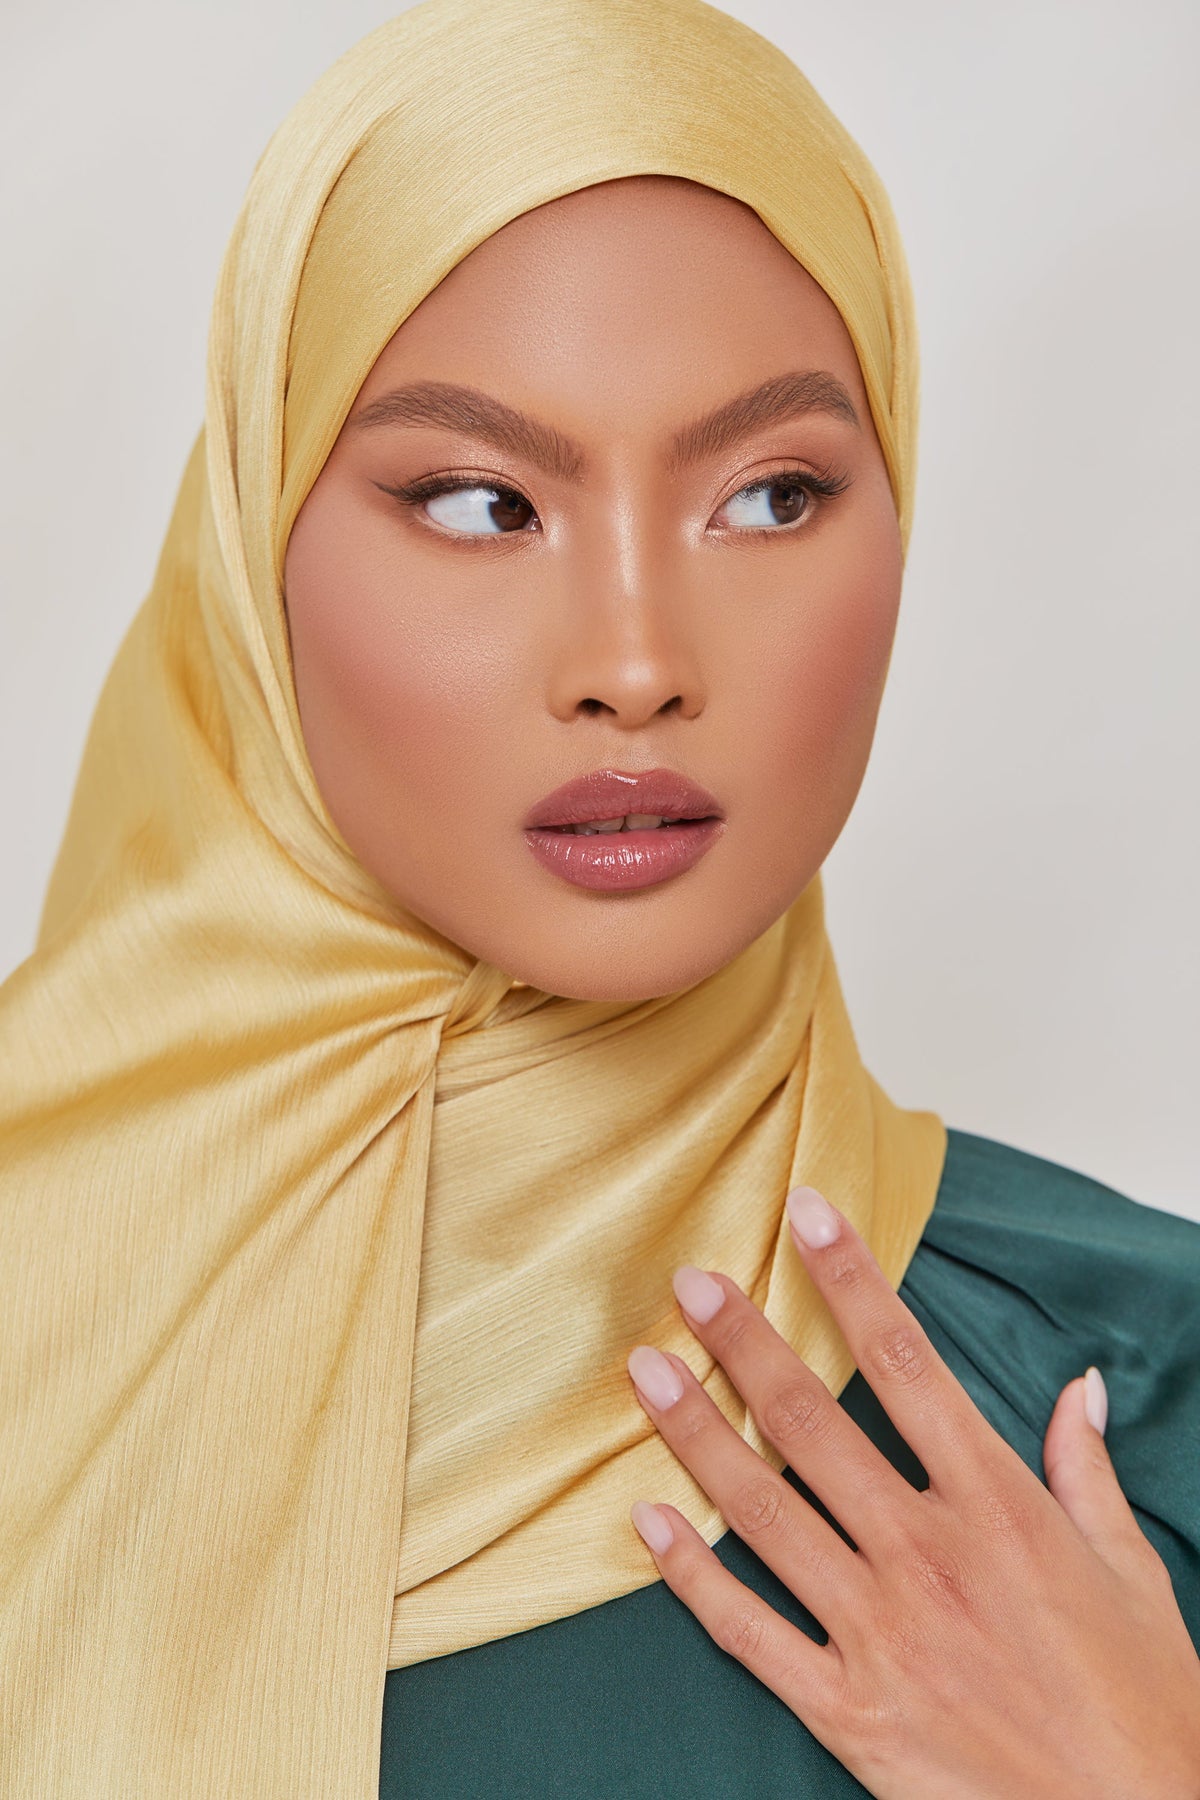 TEXTURE Satin Crepe Hijab - Sunlight Crepe Veiled Collection 